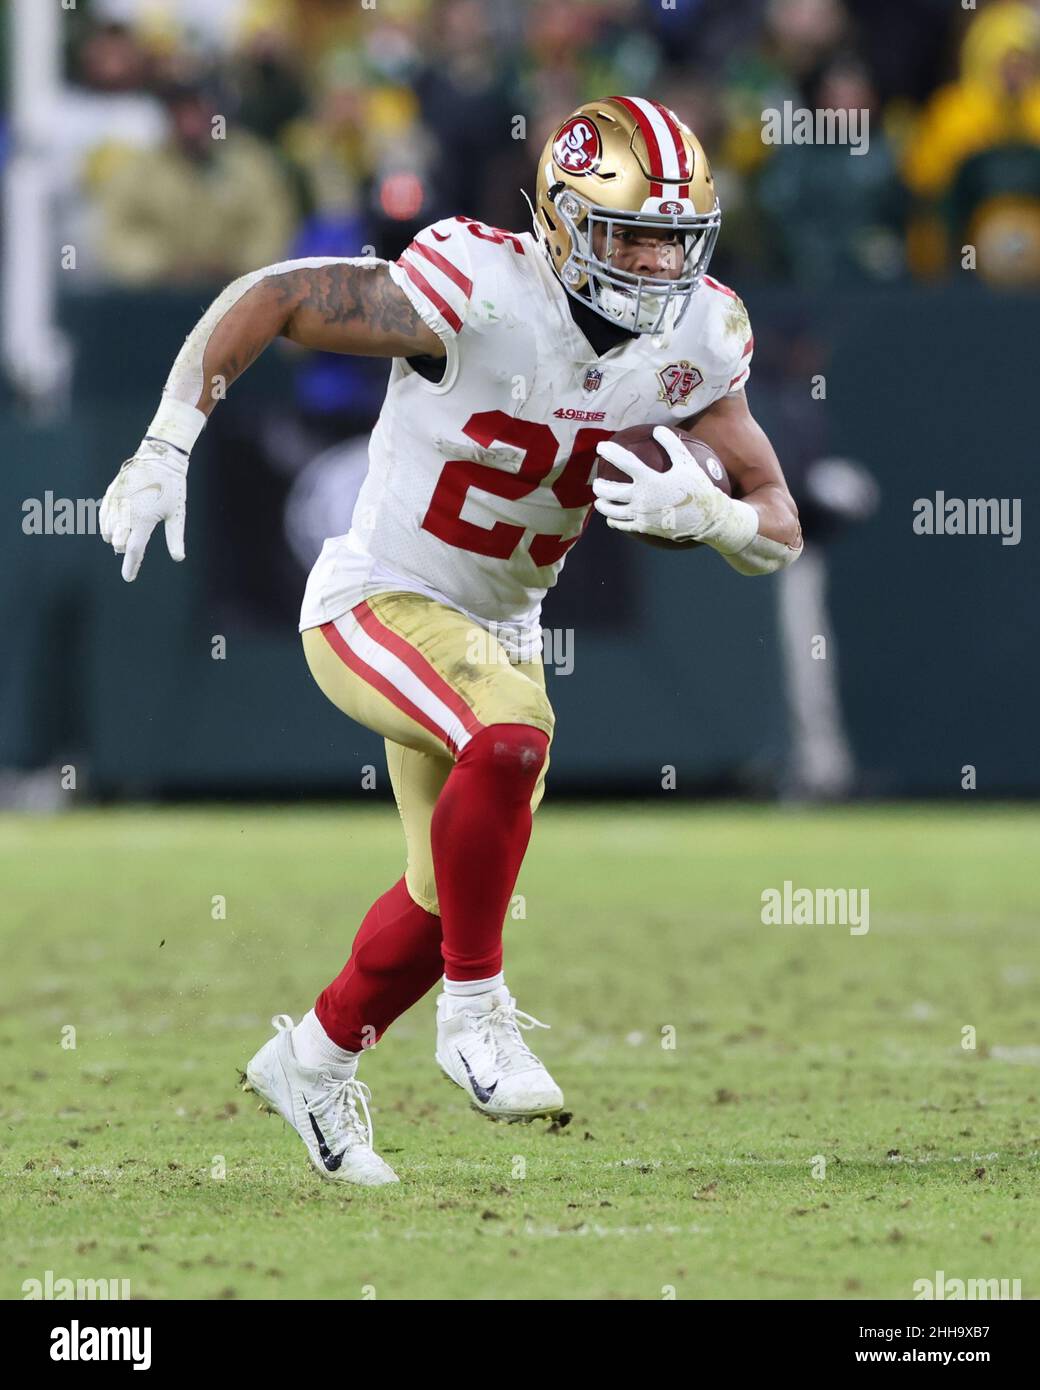 Green Bay, Wisconsin, USA. 22nd Jan, 2022. San Francisco 49ers running back Elijah Mitchell (25) during the NFL divisional playoff football game between the San Francisco 49ers and the Green Bay Packers at Lambeau Field in Green Bay, Wisconsin. Darren Lee/CSM/Alamy Live News Stock Photo